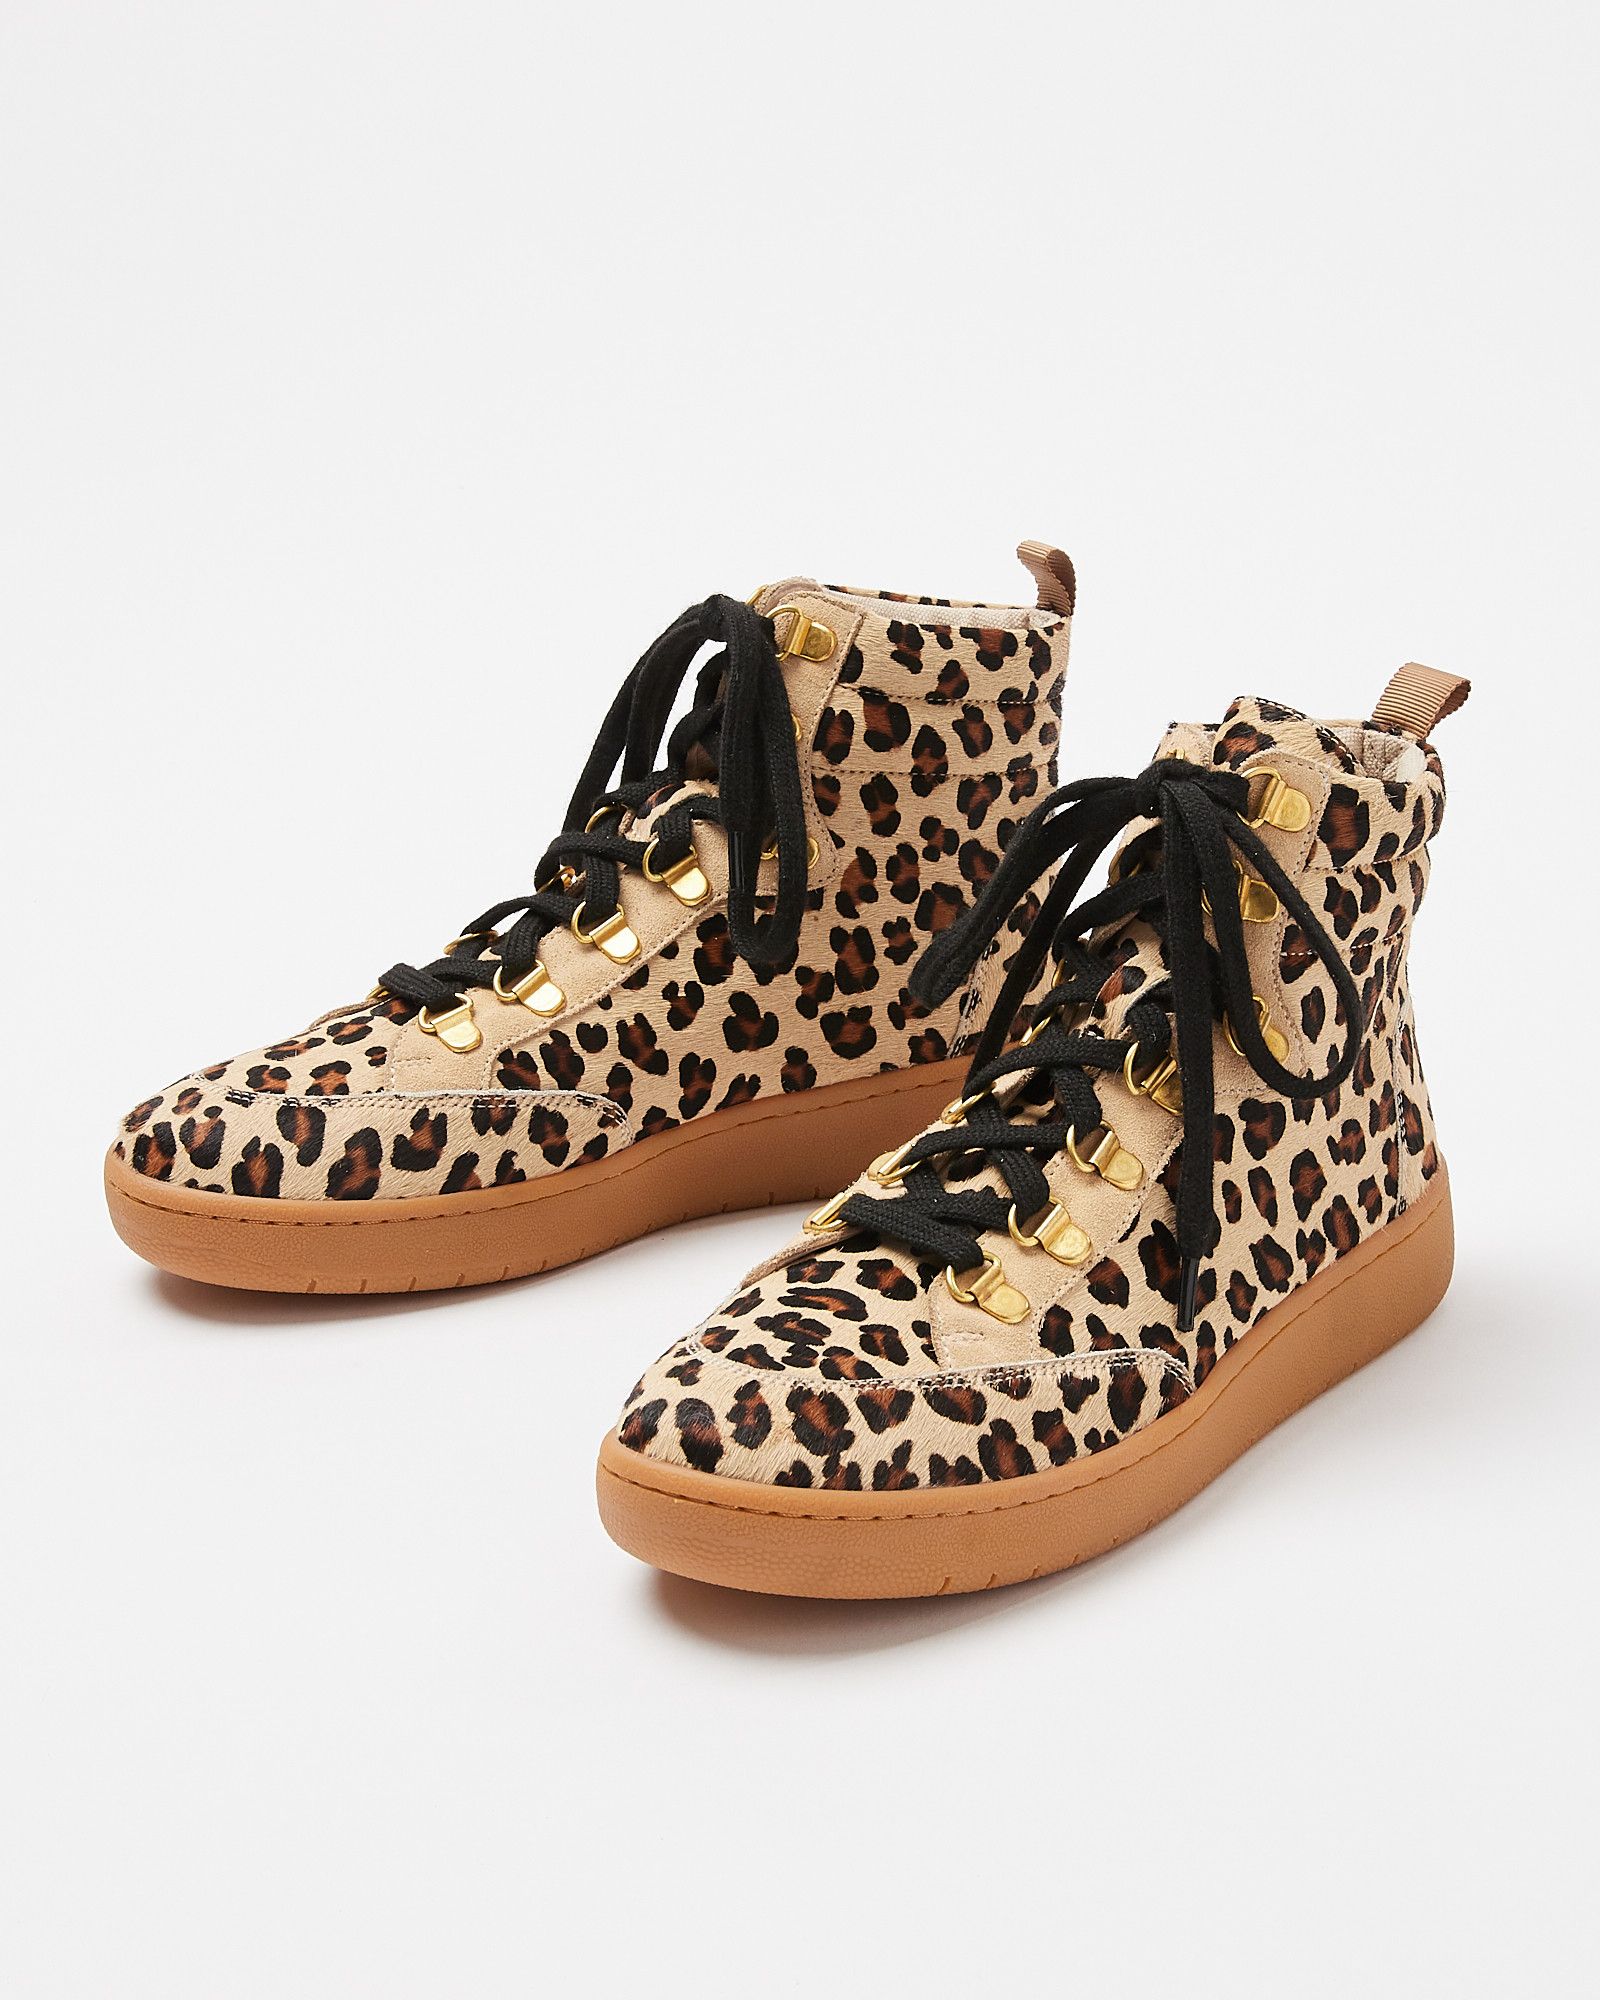 ankle leopard boots